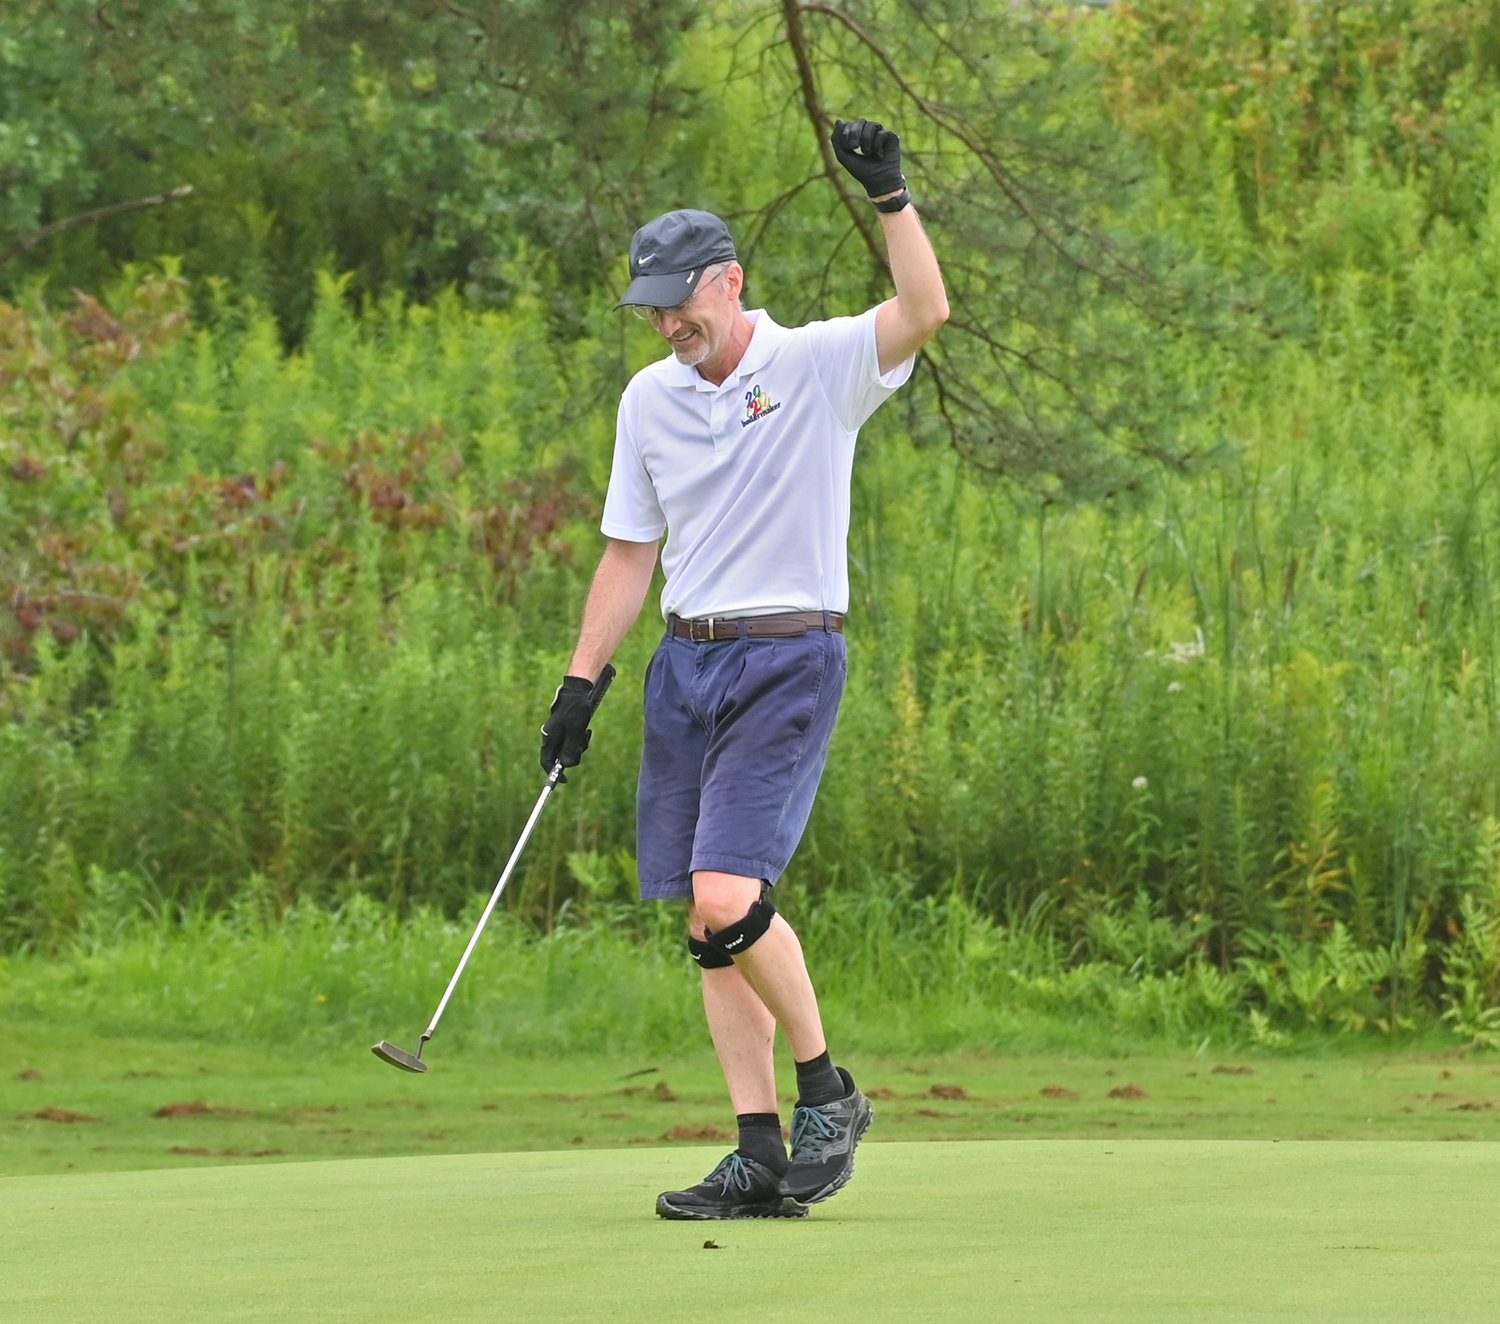 ALL DONE — Mohawk Valley Community College President Randall VanWagoner of New Hartford gives a fist pump after finishing up his second round of the New York Speedgolf Open at Rome Country Club on Monday morning. VanWagoner had a two-day score of 293:02.